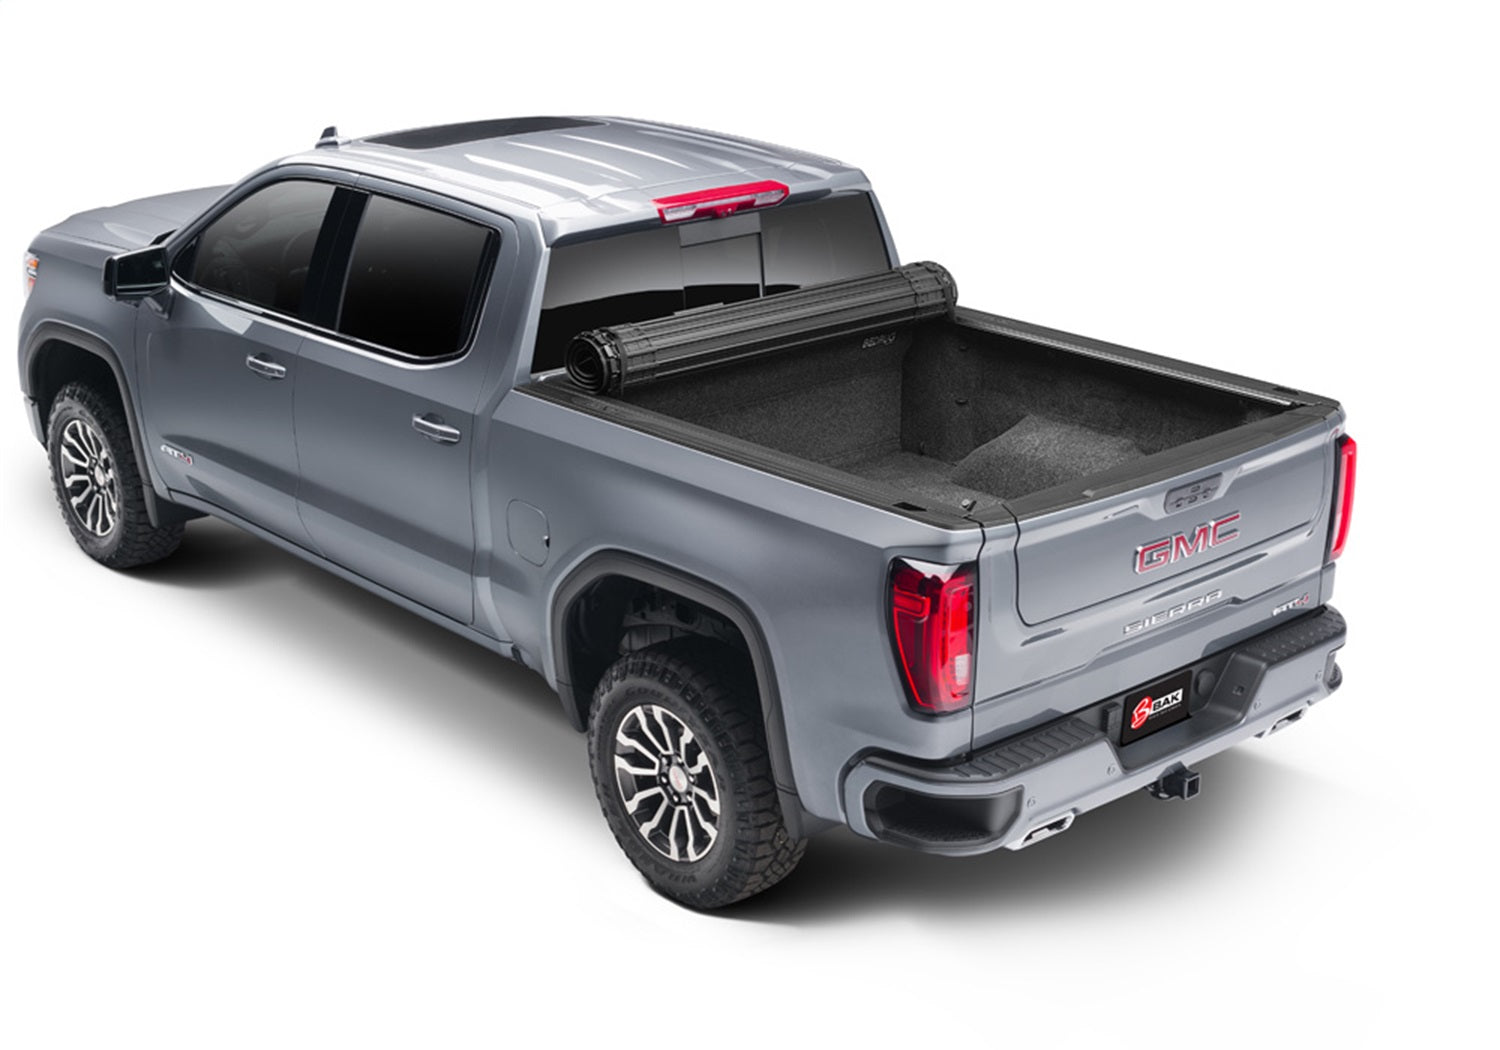 BAK Industries 80135 Revolver X4s Hard Rolling Truck Bed Cover Fits Sierra 1500